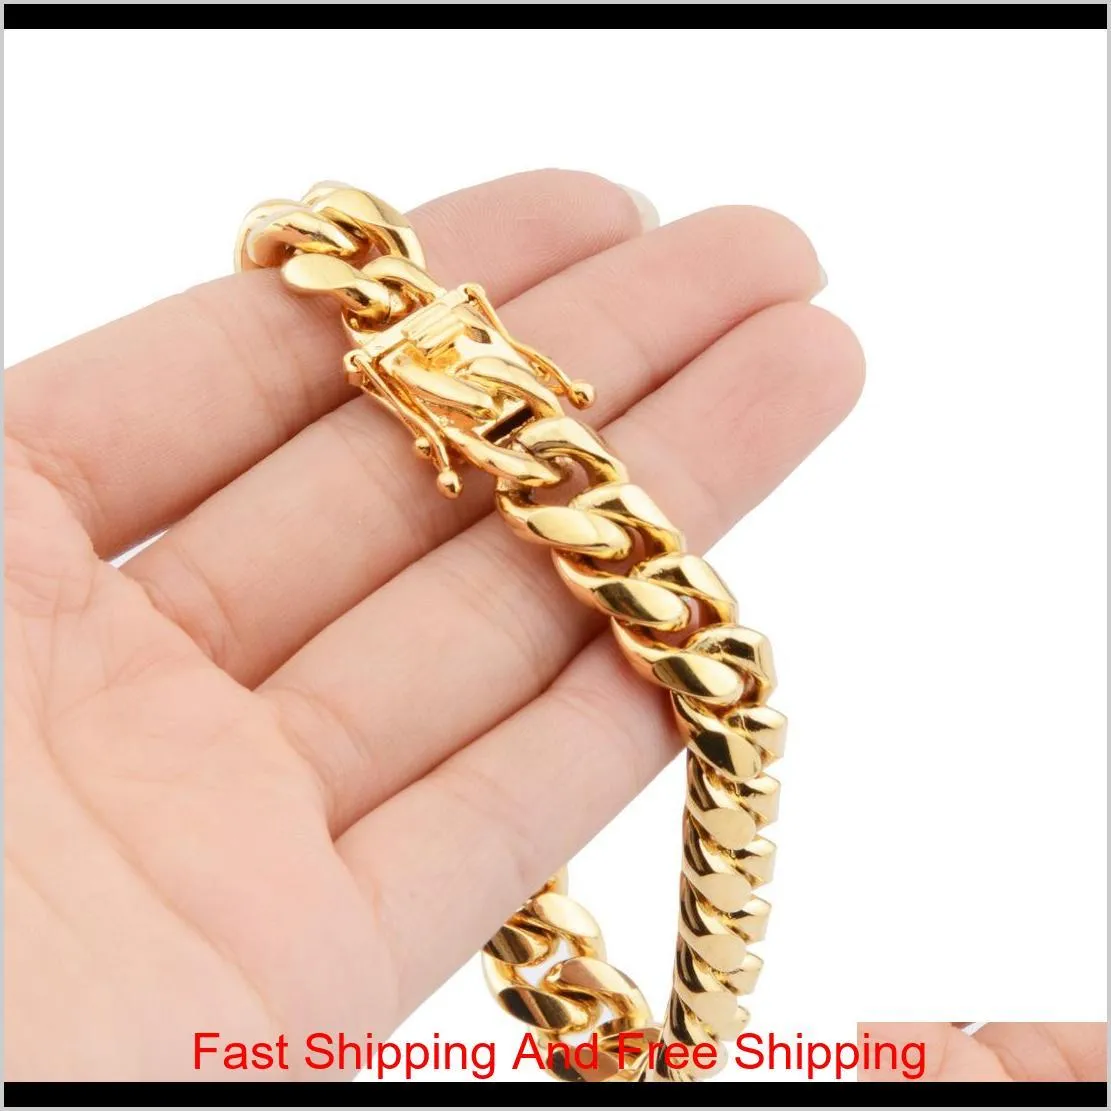 8mm/10mm/12mm/14mm/16mm/18mm stainless steel bracelets 18k gold plated high polished miami cuban link men punk curb chain butterfly